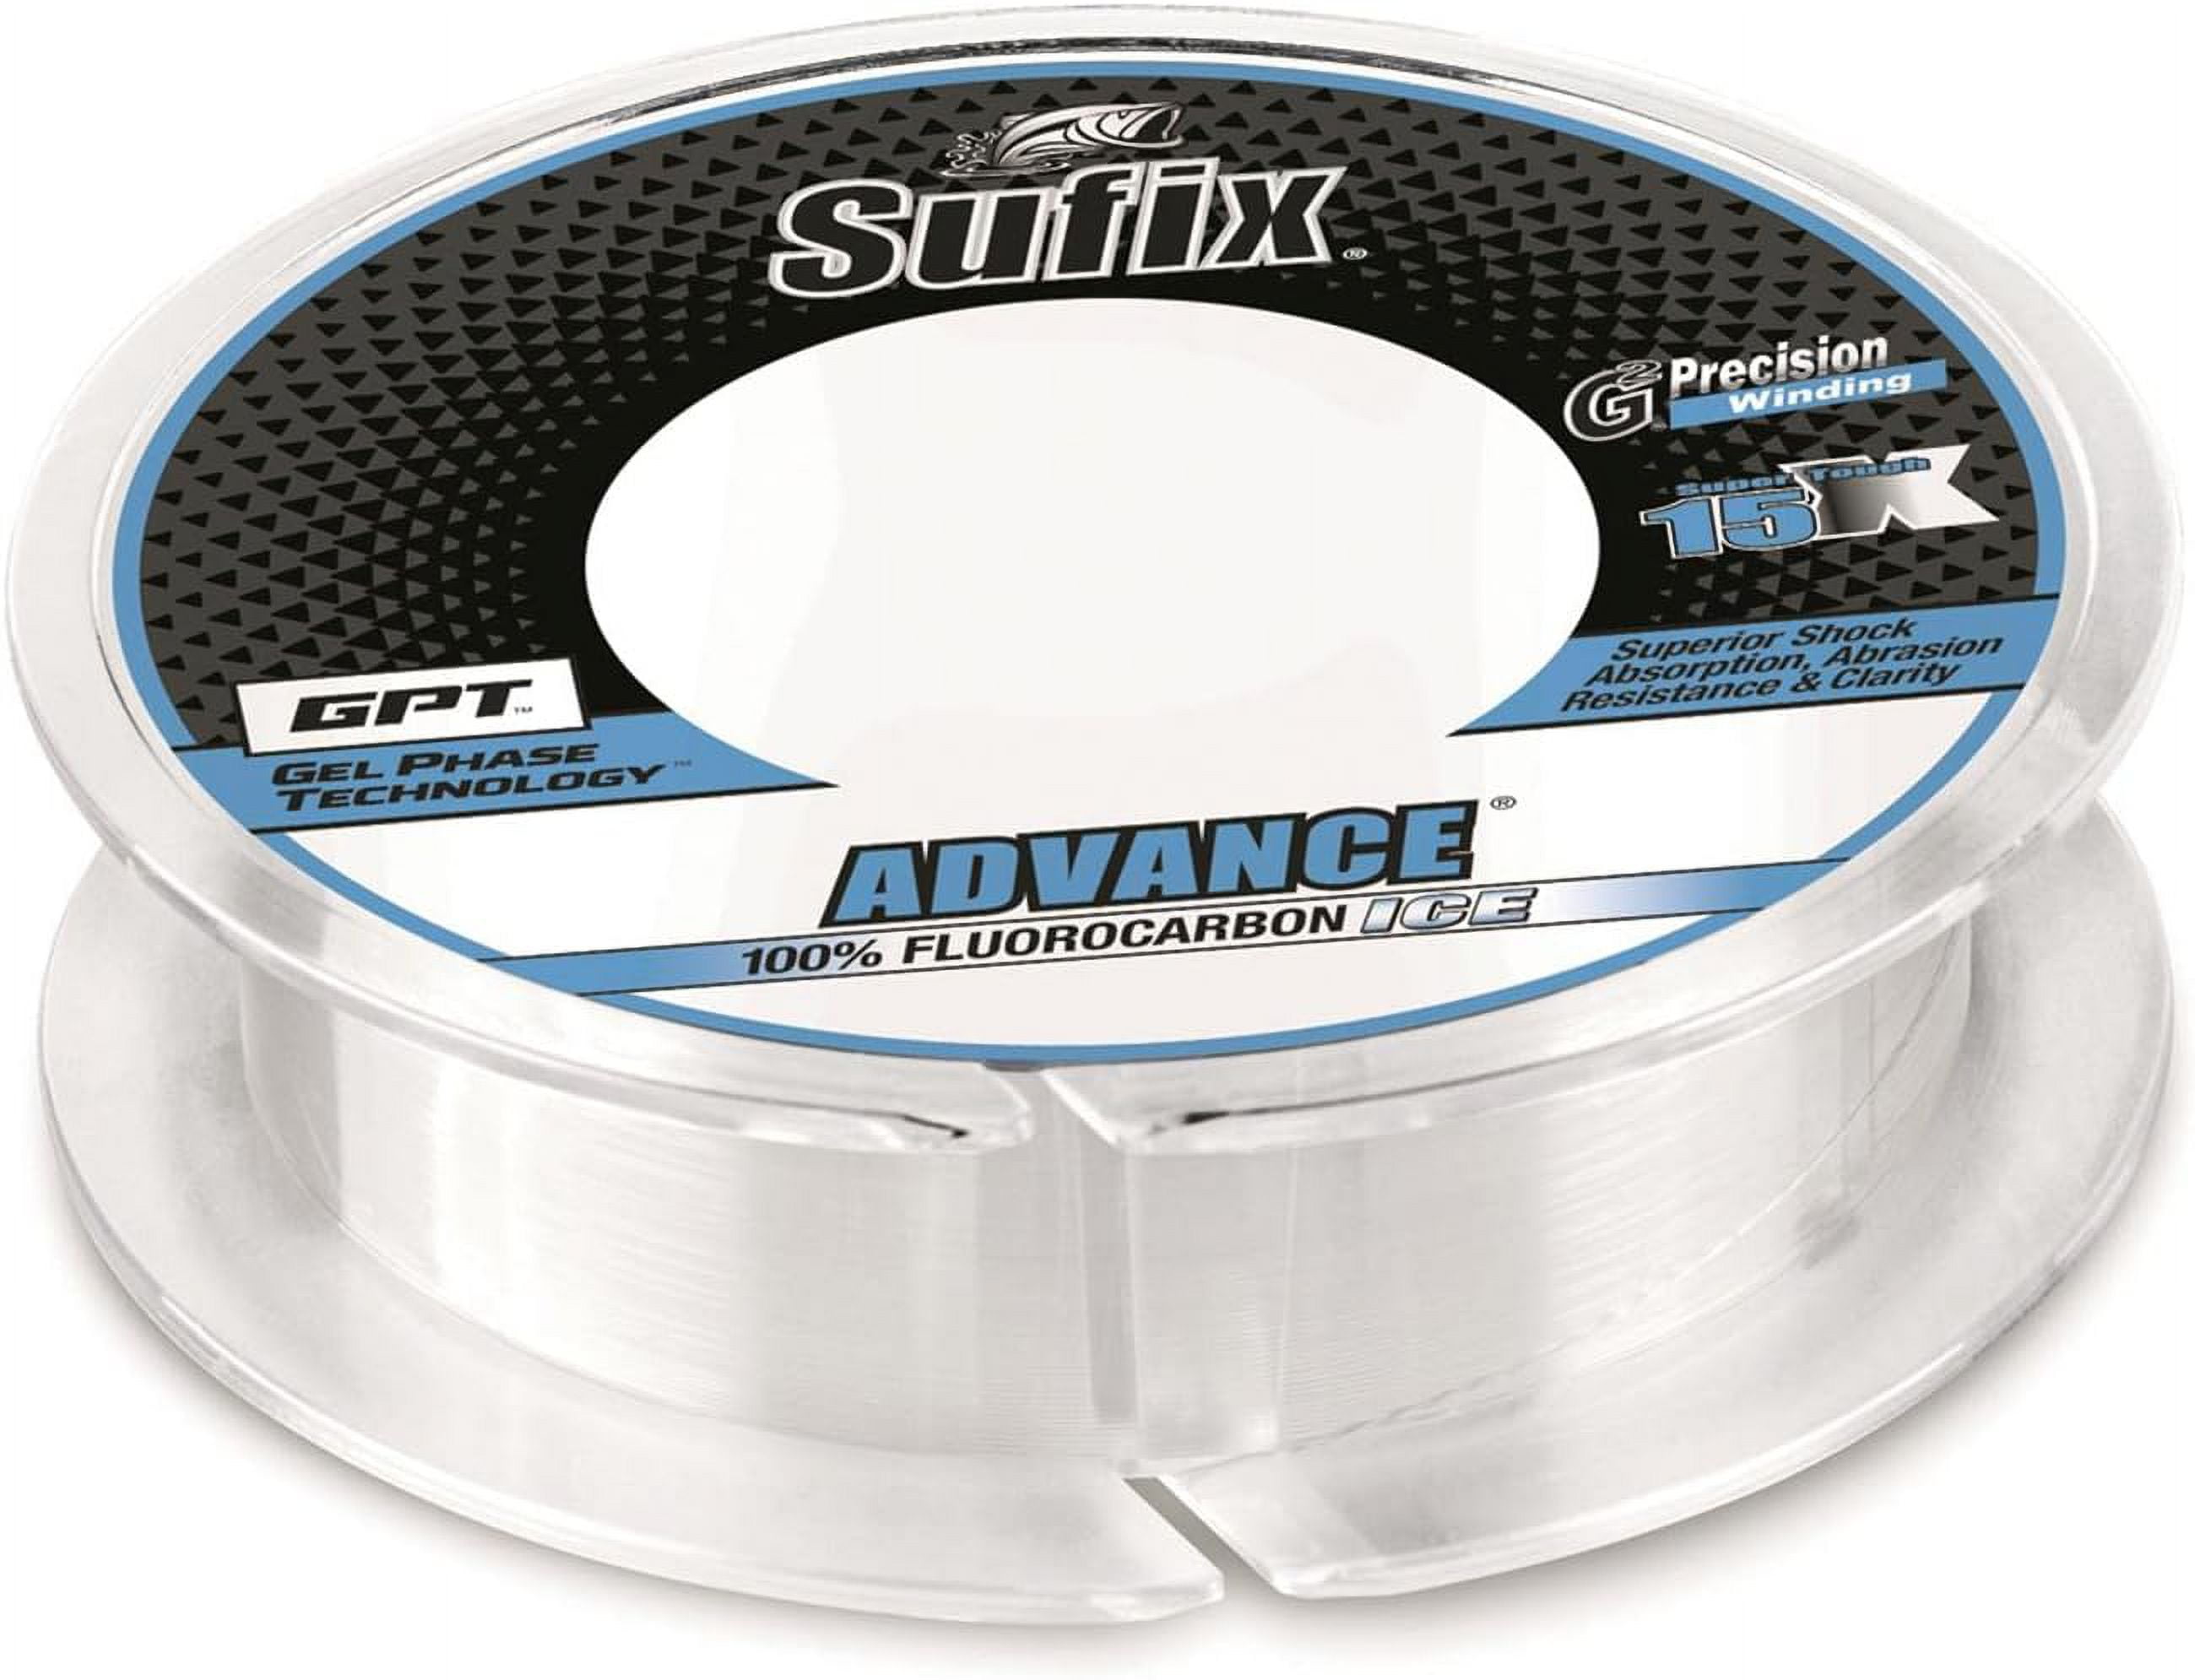 Sufix 50 Yard Advance Ice Fluorocarbon Fishing Line - 3 lb. Test - Clear 